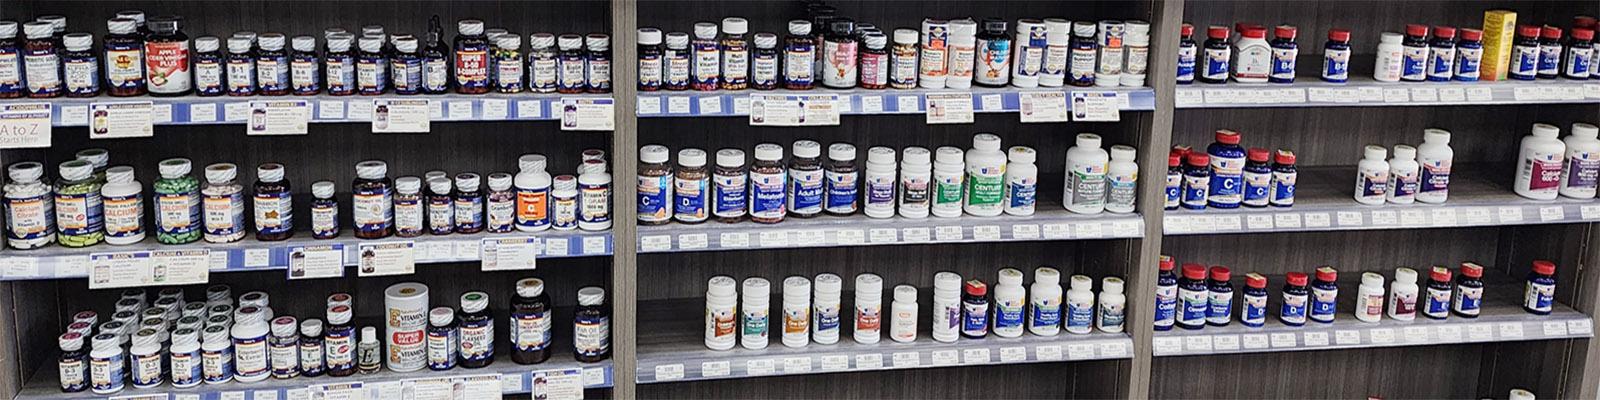 Basic Vitamins and Supplements